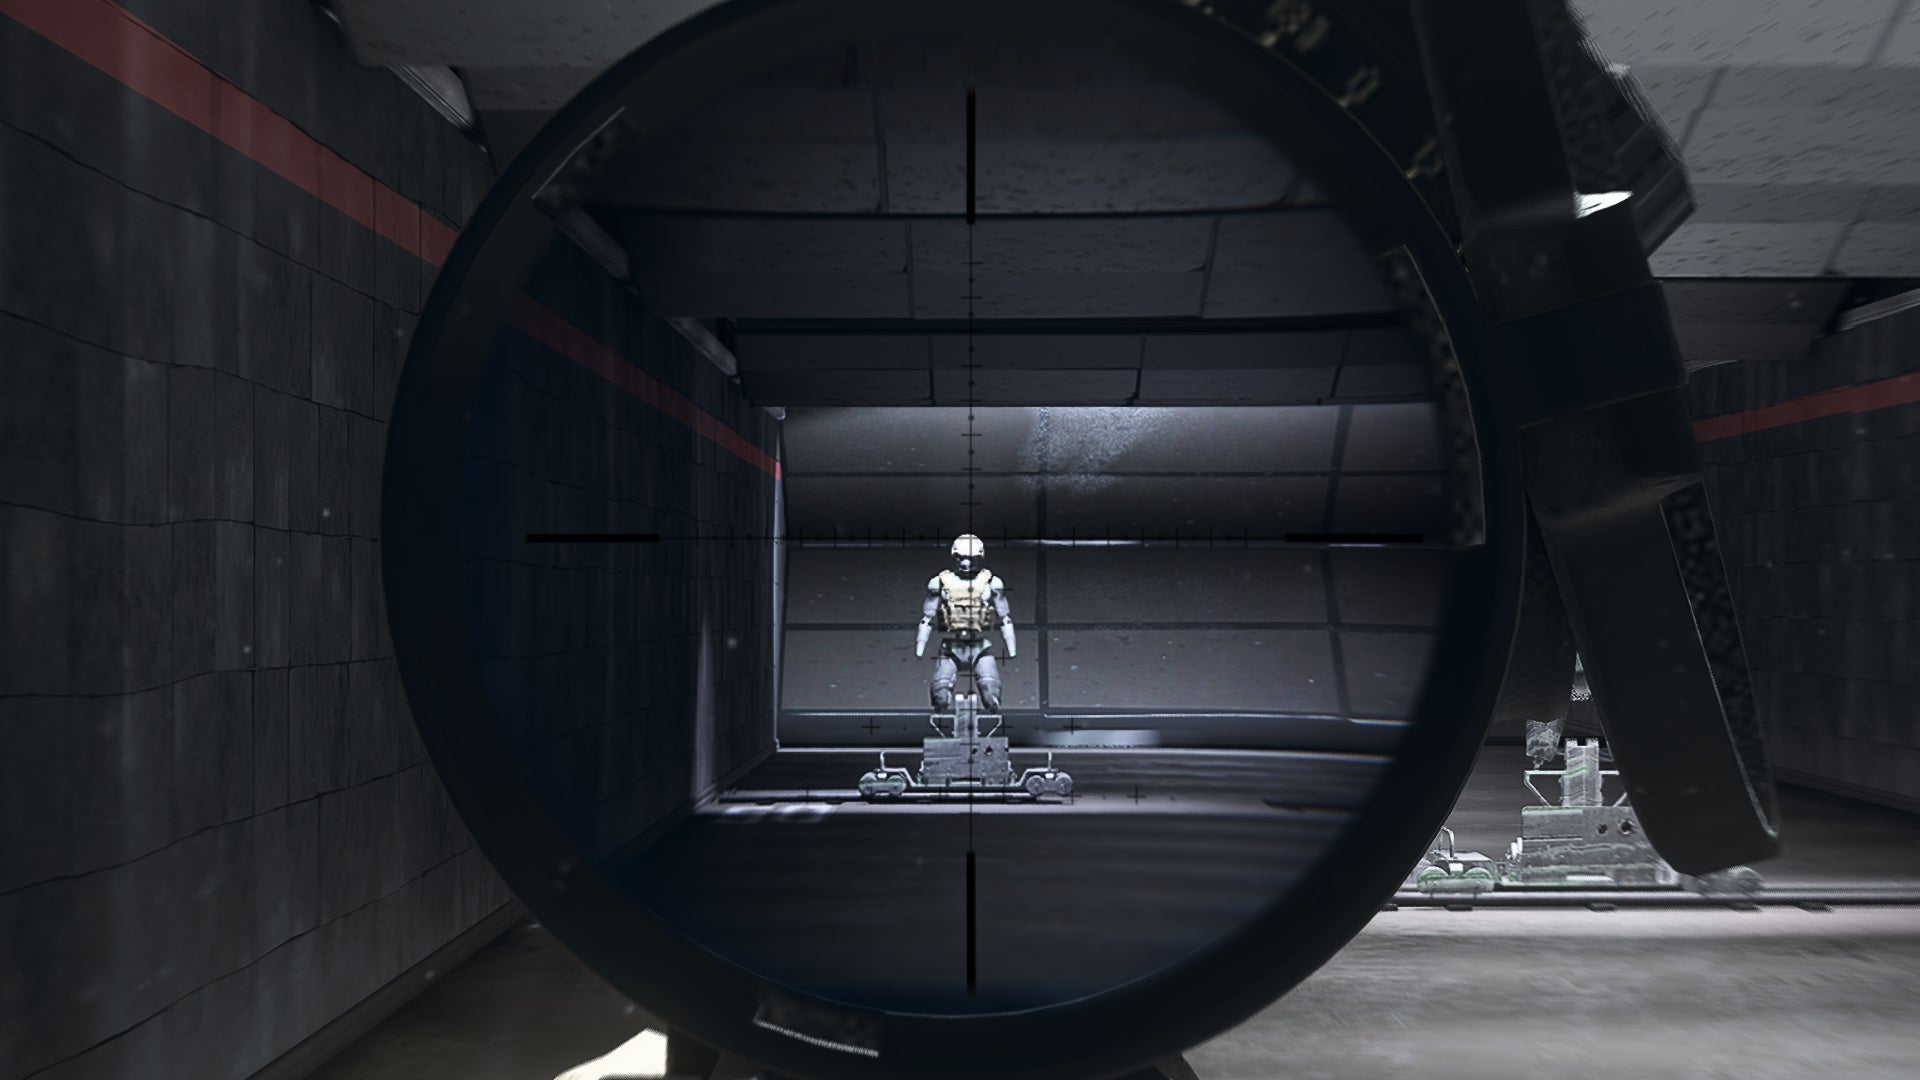 The player in Warzone 2.0 aims at a training dummy using the DXS Coriolis v4 optic attachment.